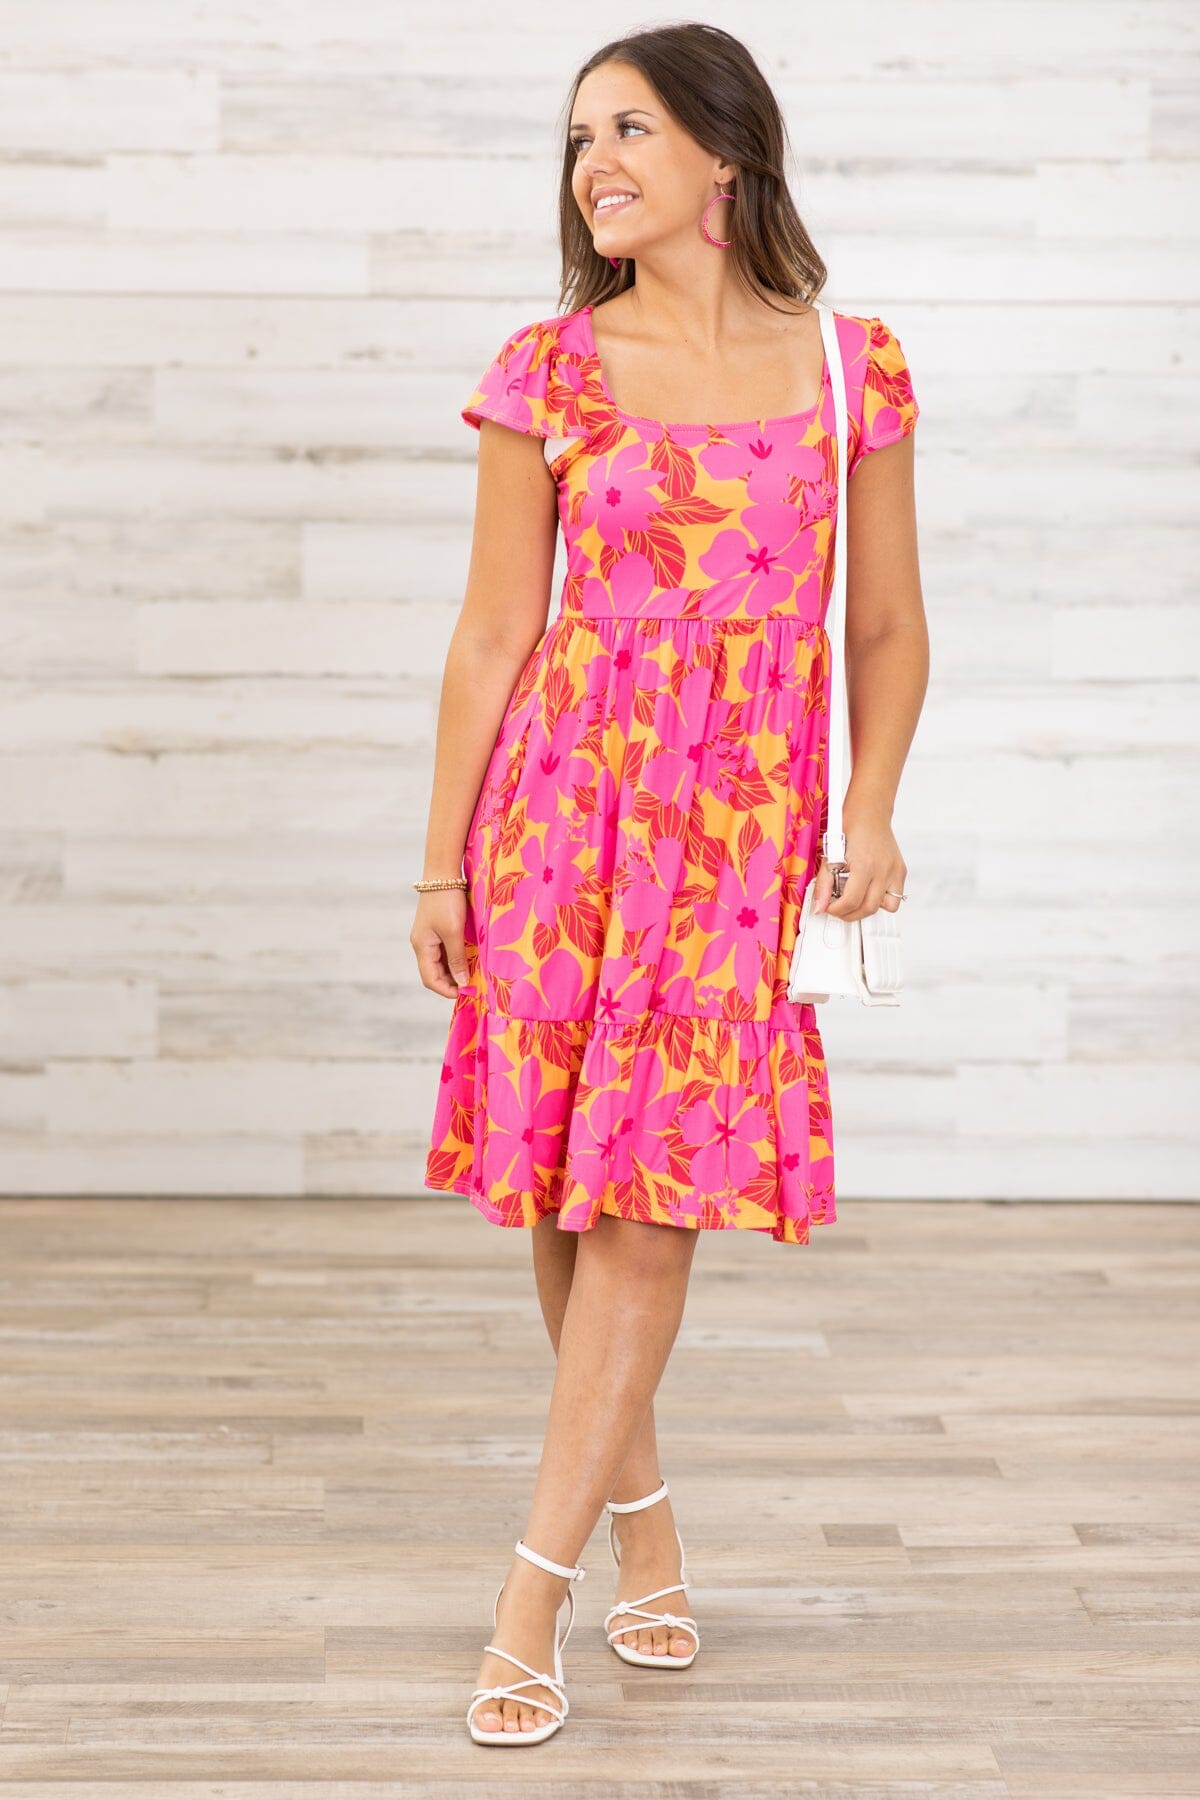 Hot Pink and Orange Floral Print Dress - Filly Flair